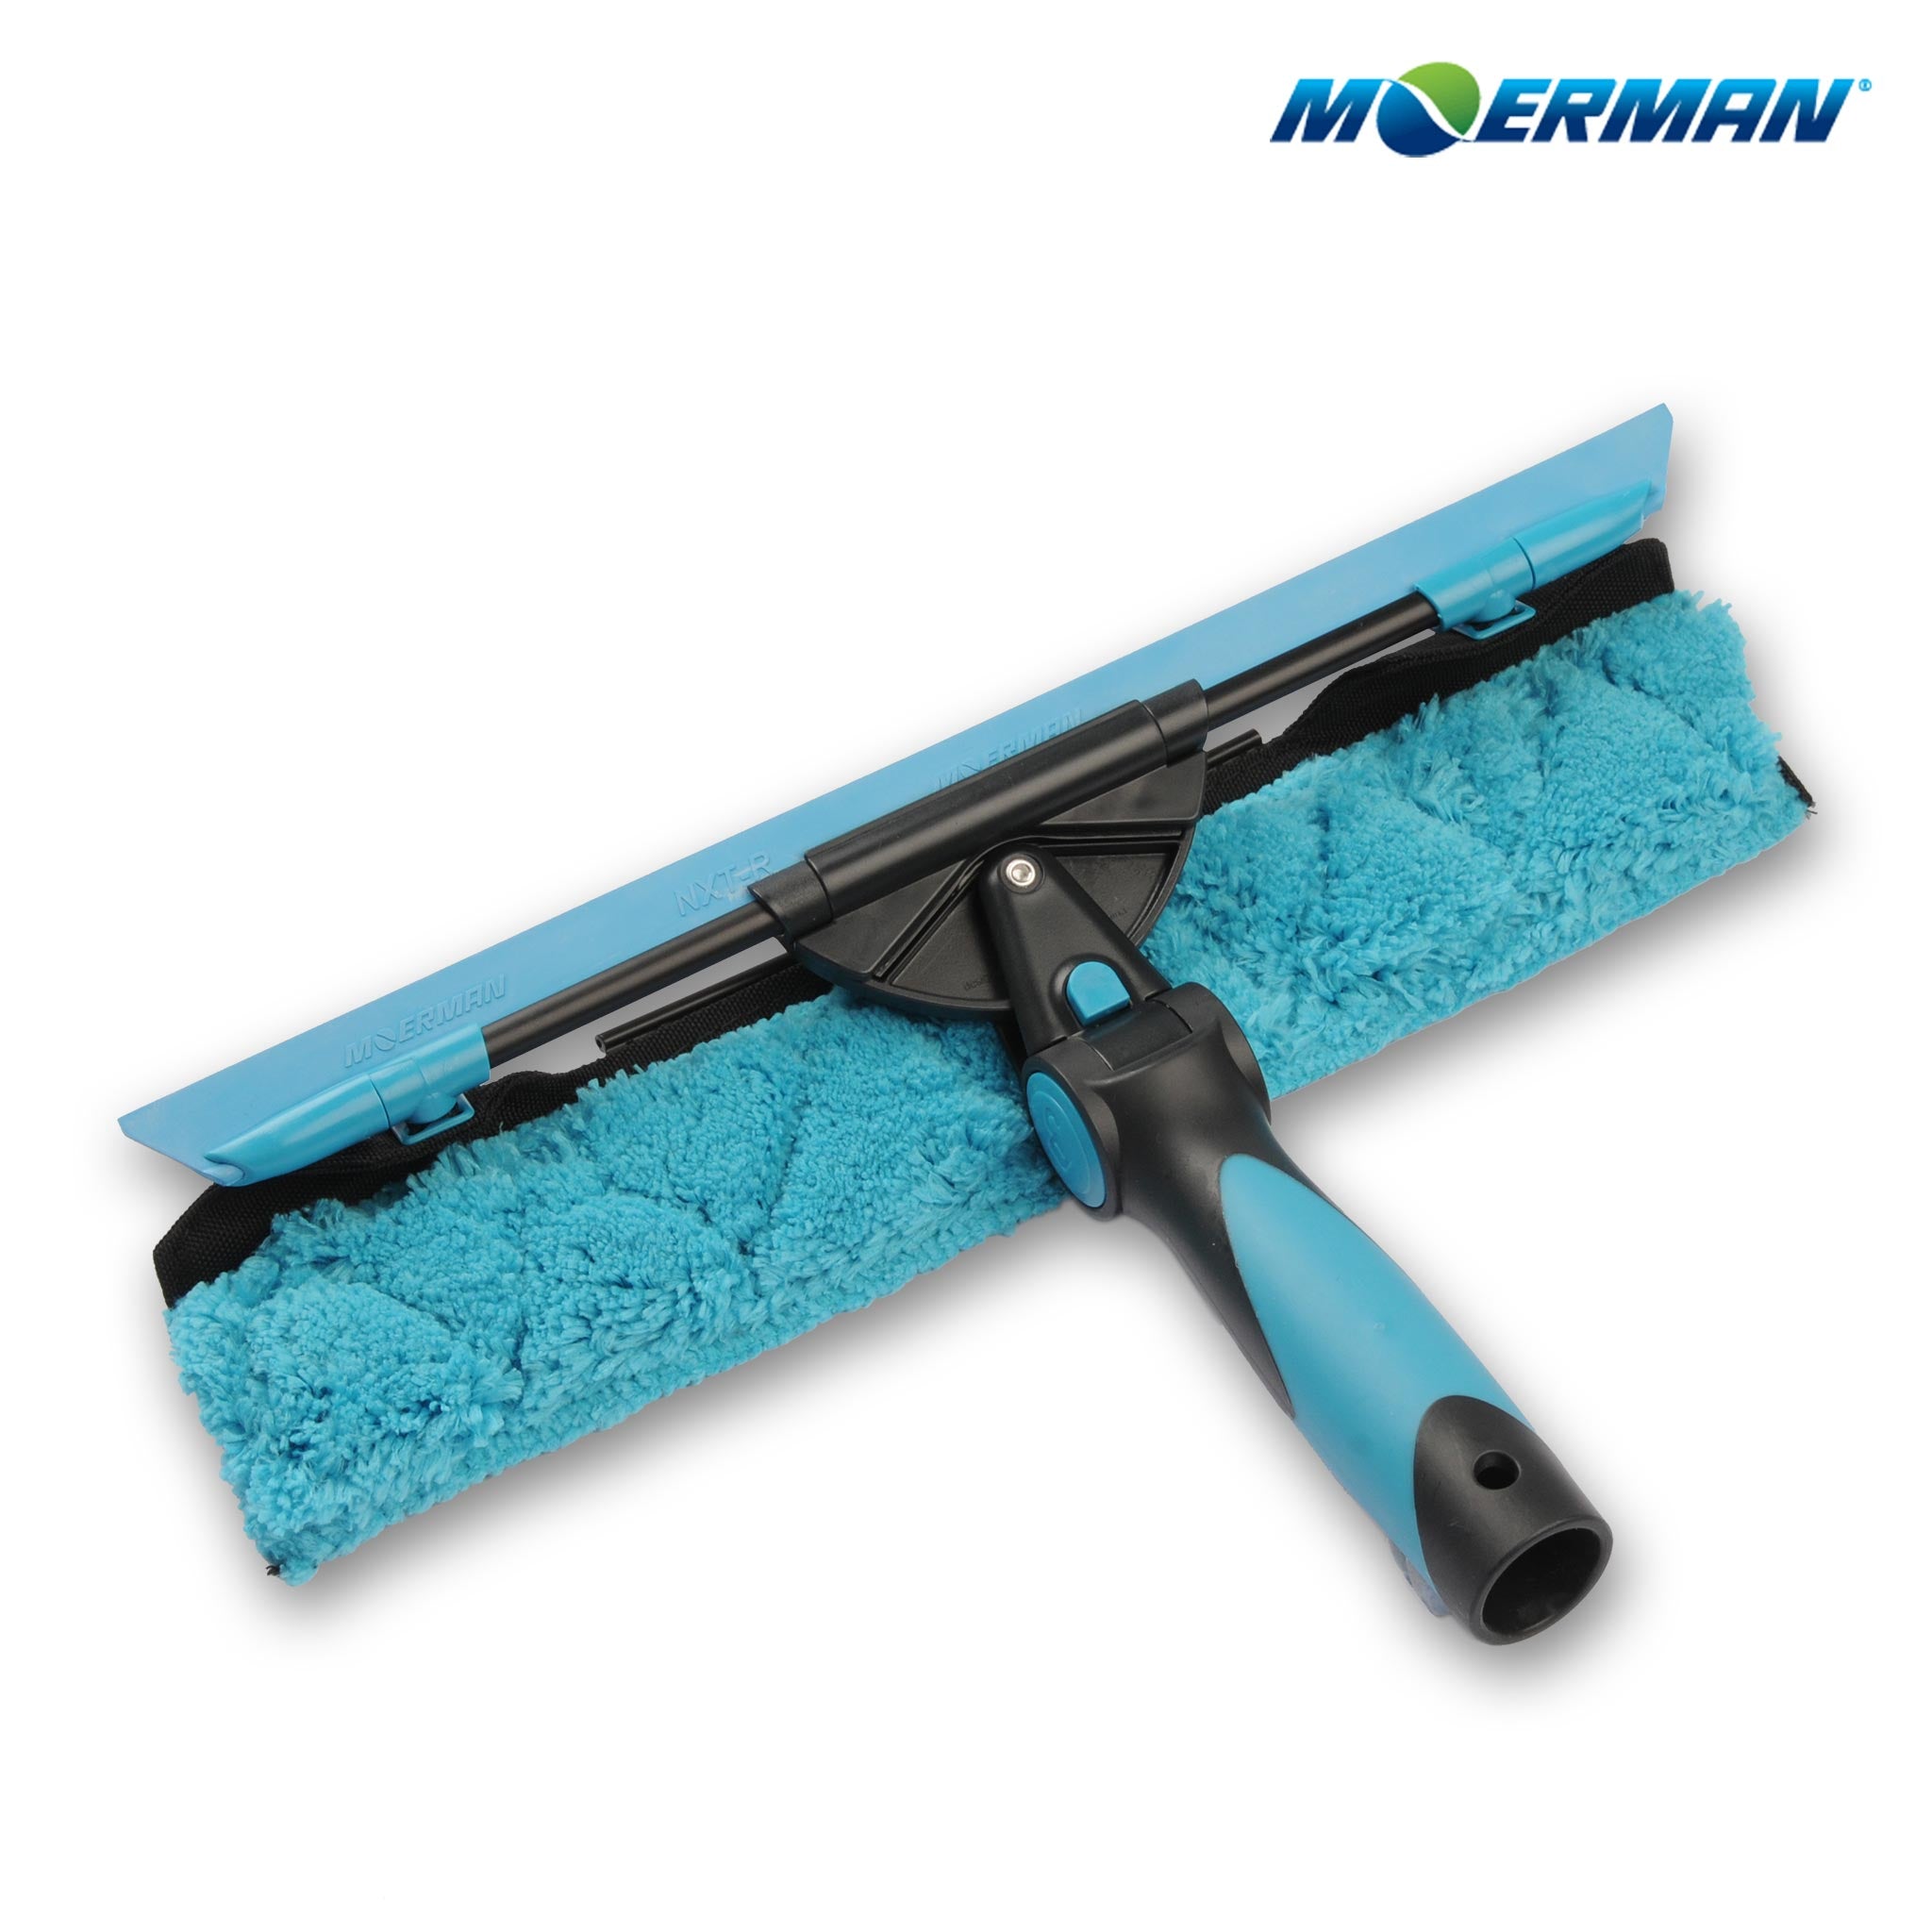 Moerman Excelerator 2.0 and Fliq Combo: Wash & Squeegee